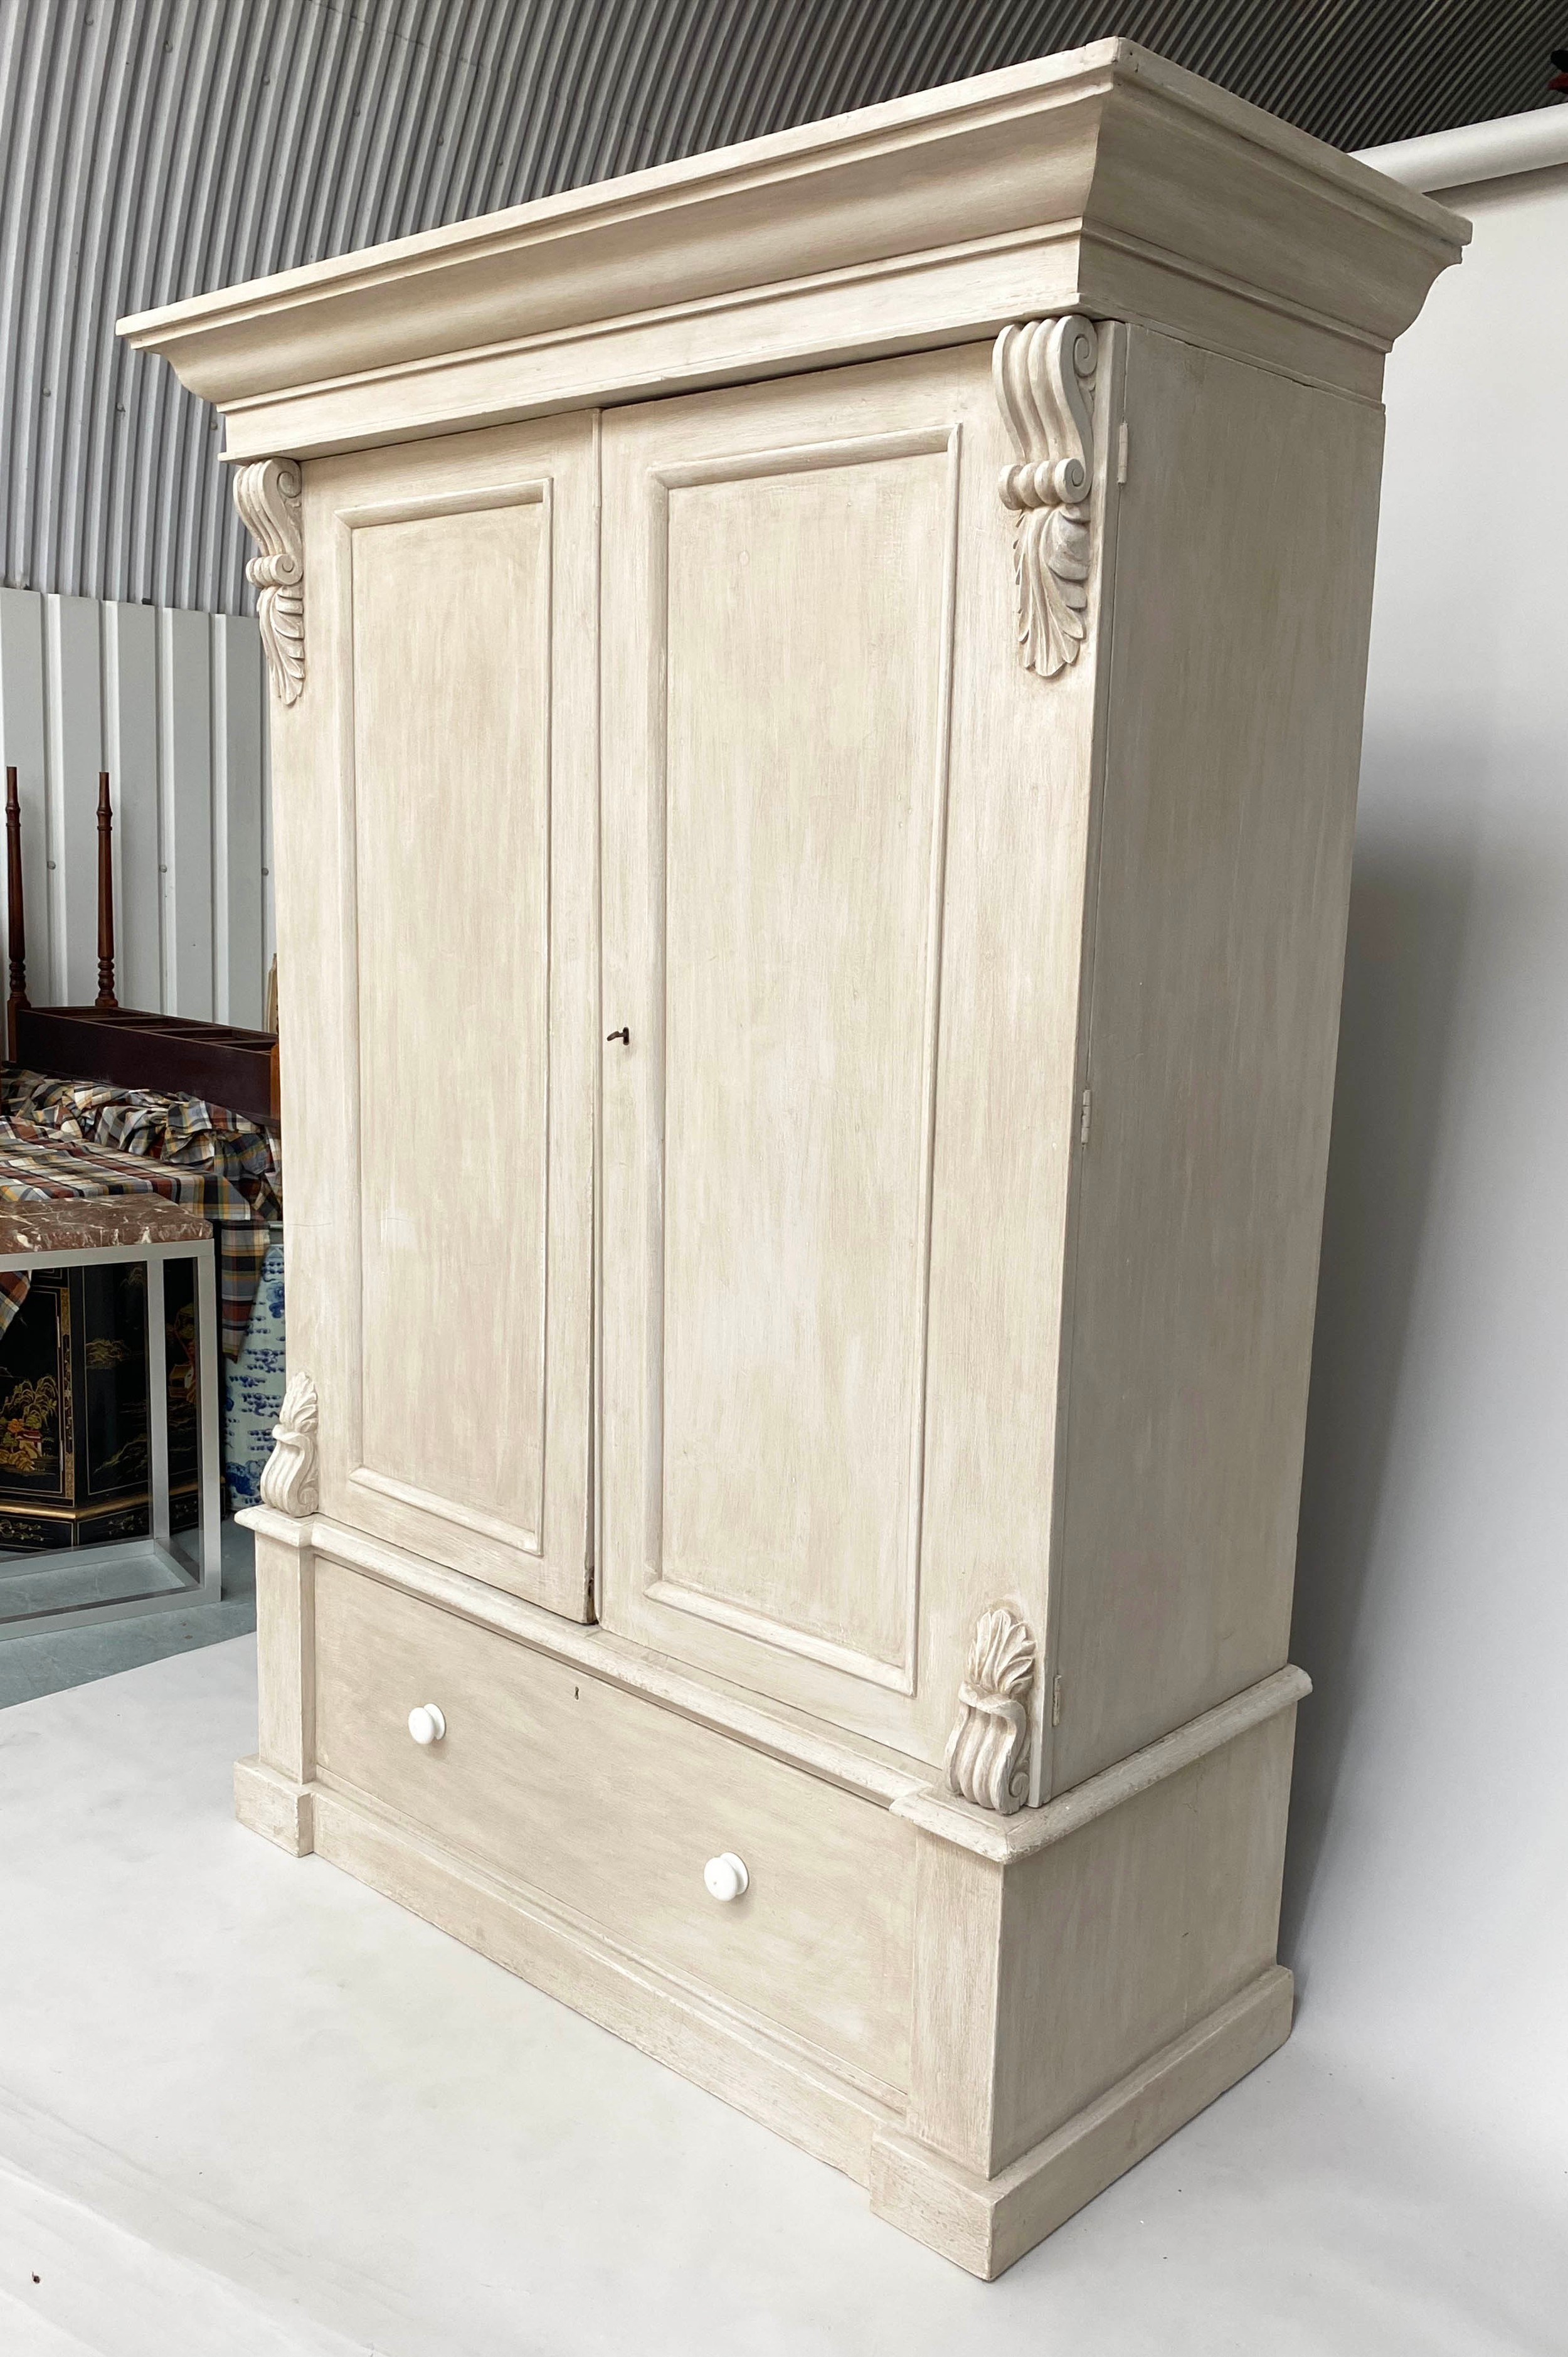 WARDROBE, 19th century, traditionally grey painted, with two doors enclosing hanging space above a - Image 11 of 11